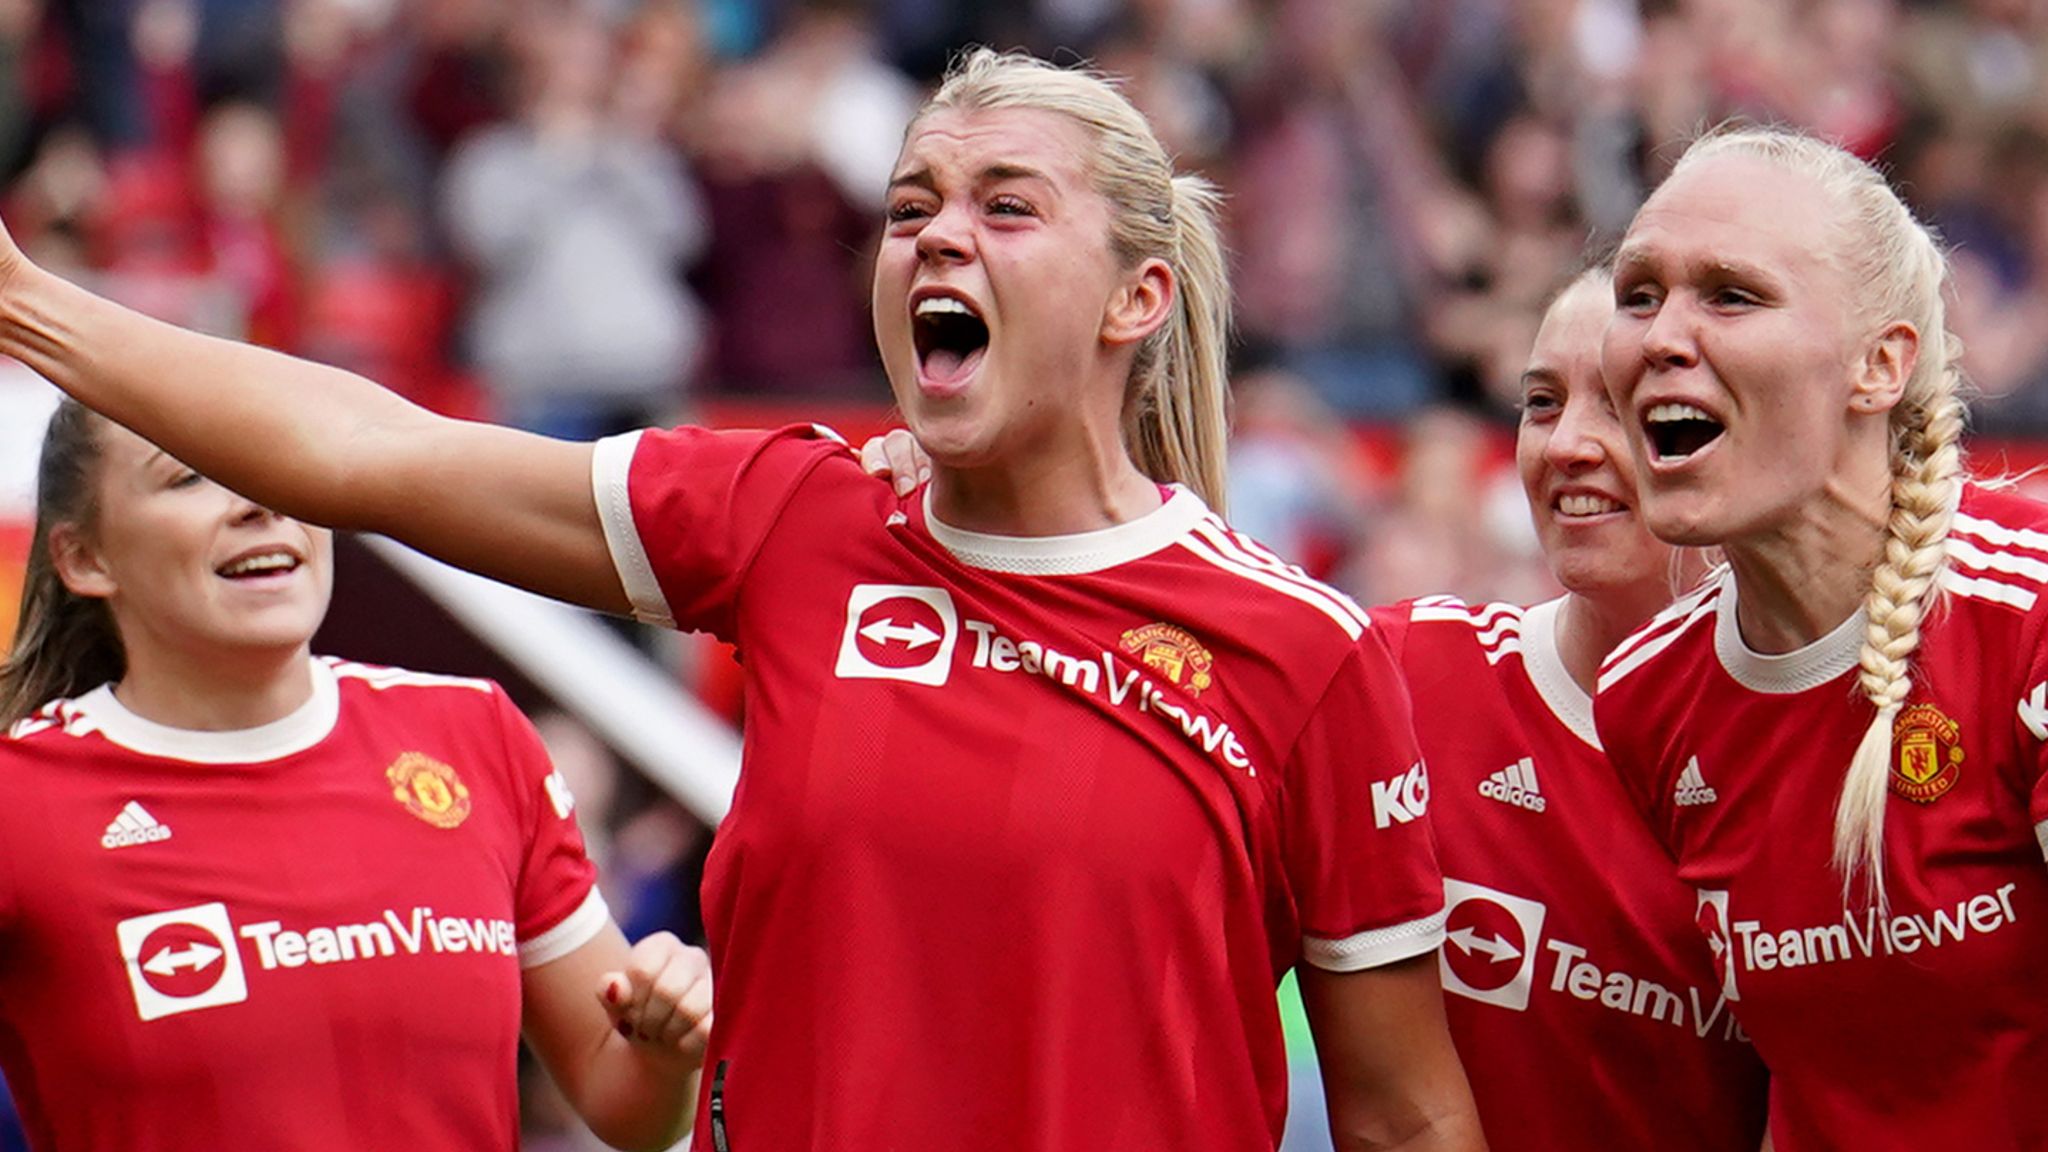 Man Utd Women 3-1 Everton Women: Alessia Russo's double helps Utd win first  match in front of fans at Old Trafford, Football News